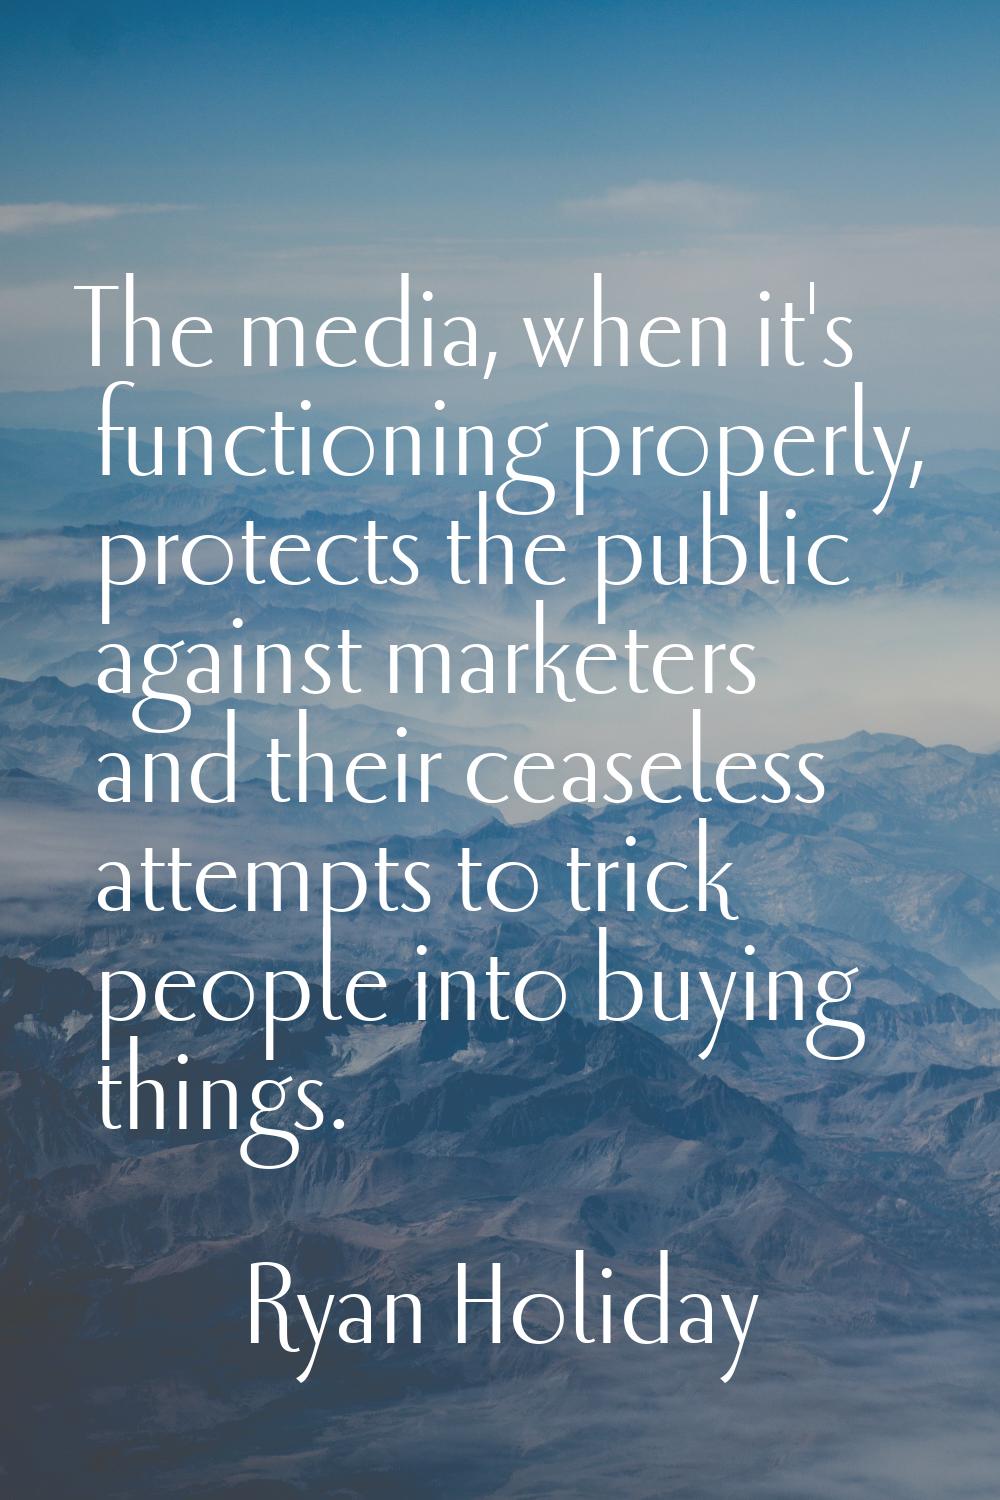 The media, when it's functioning properly, protects the public against marketers and their ceaseles